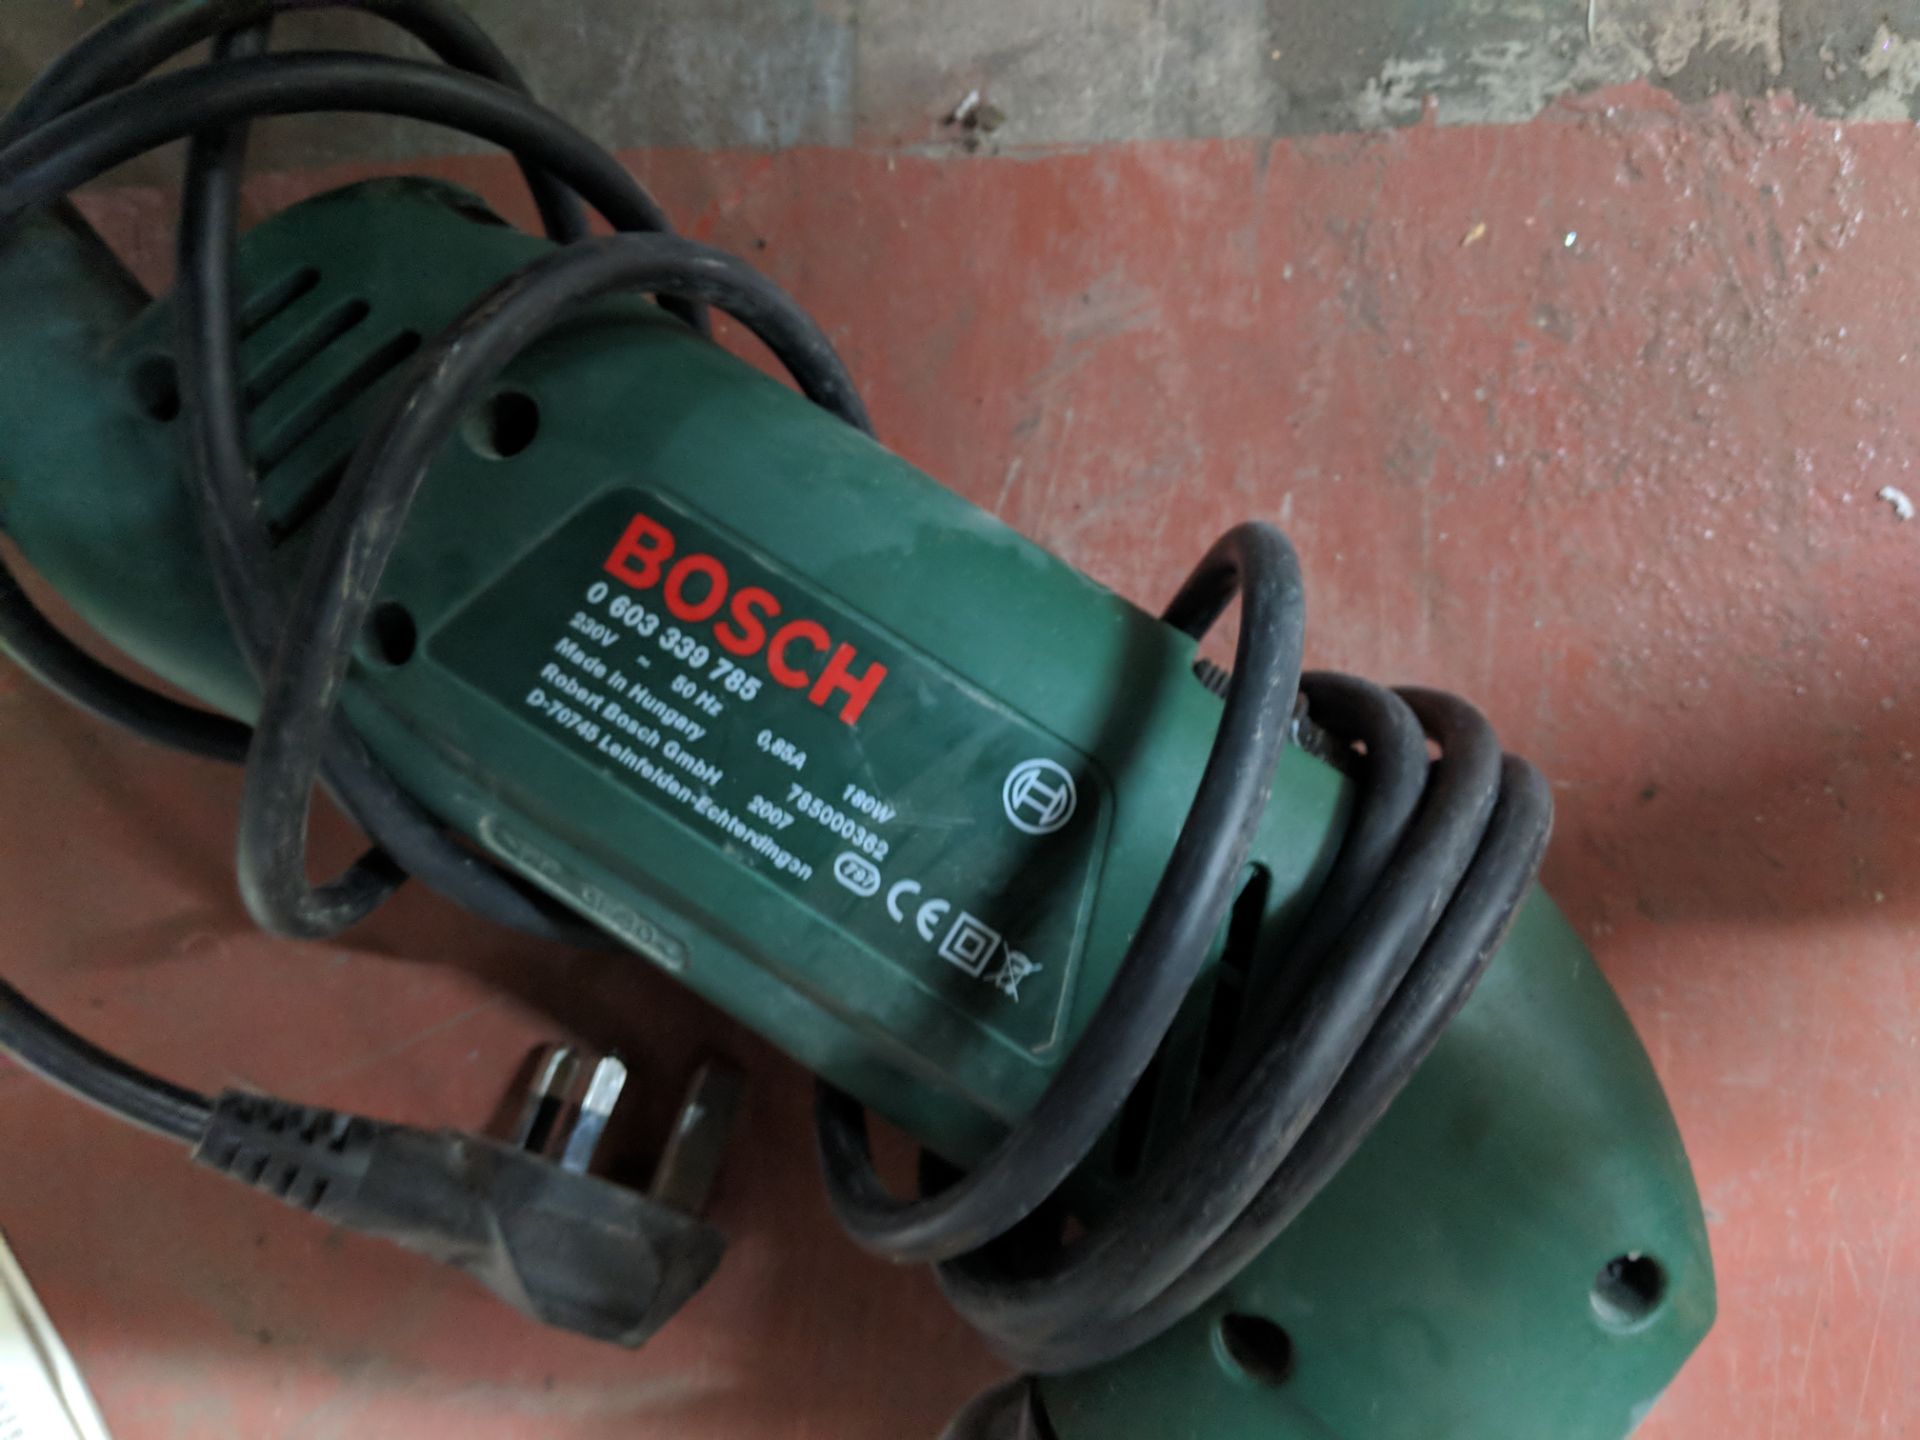 Bosch model PDA180E sander IMPORTANT: Please remember goods successfully bid upon must be paid for - Image 3 of 3